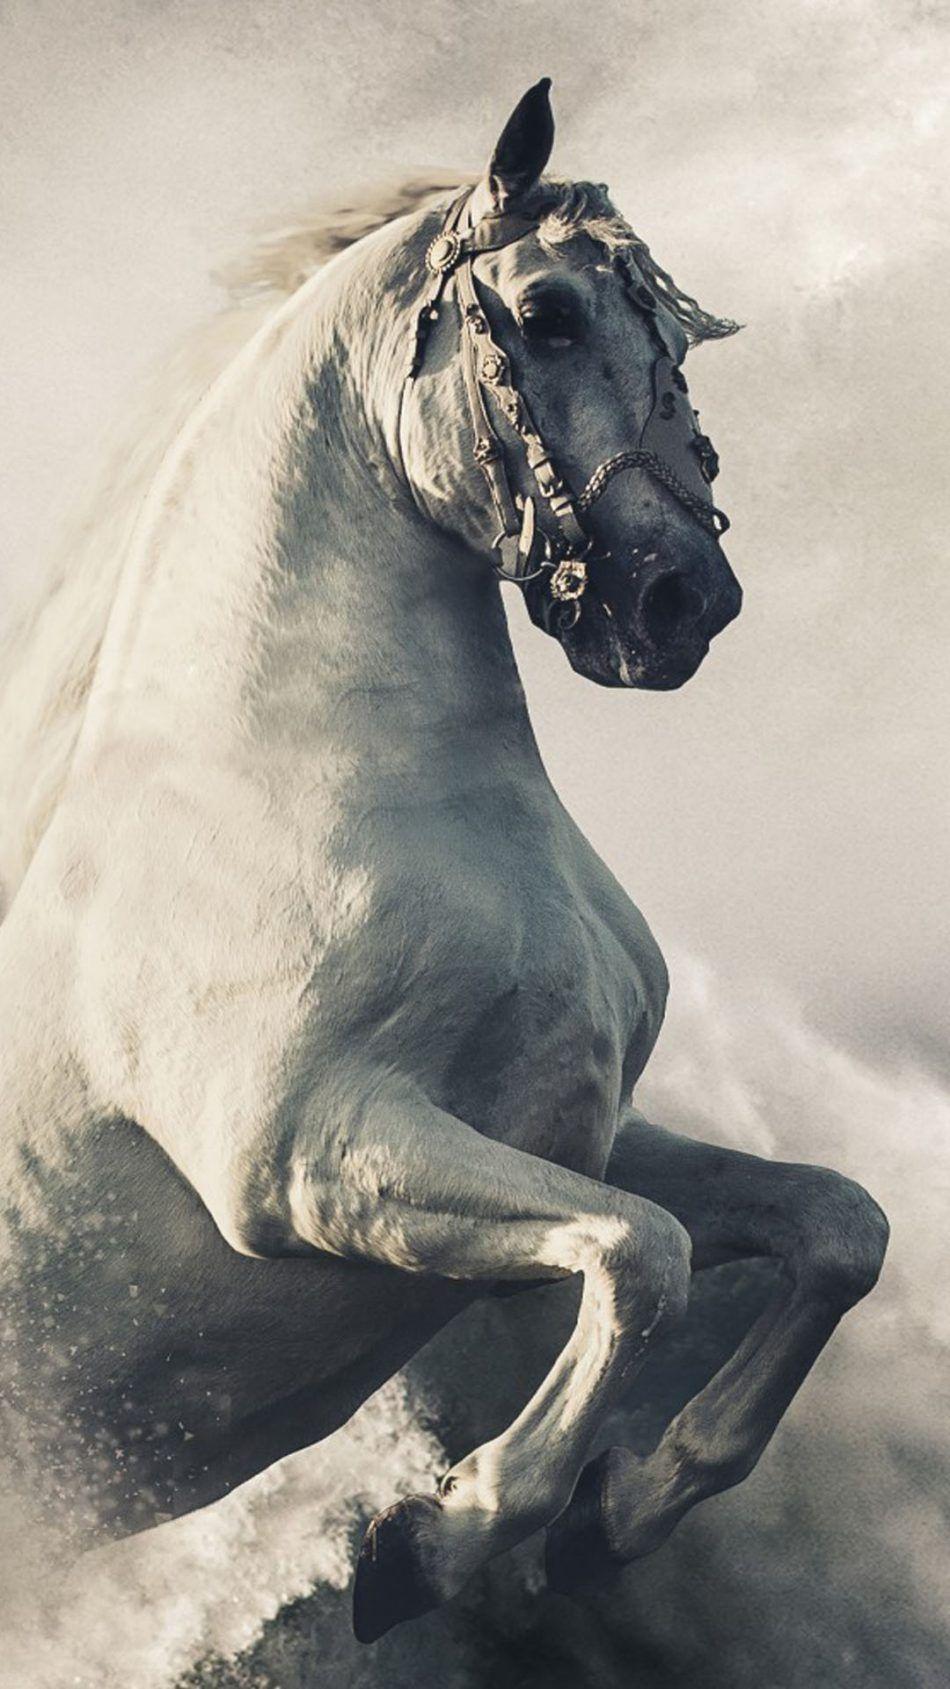 Horse Phone Wallpapers - Top Free Horse